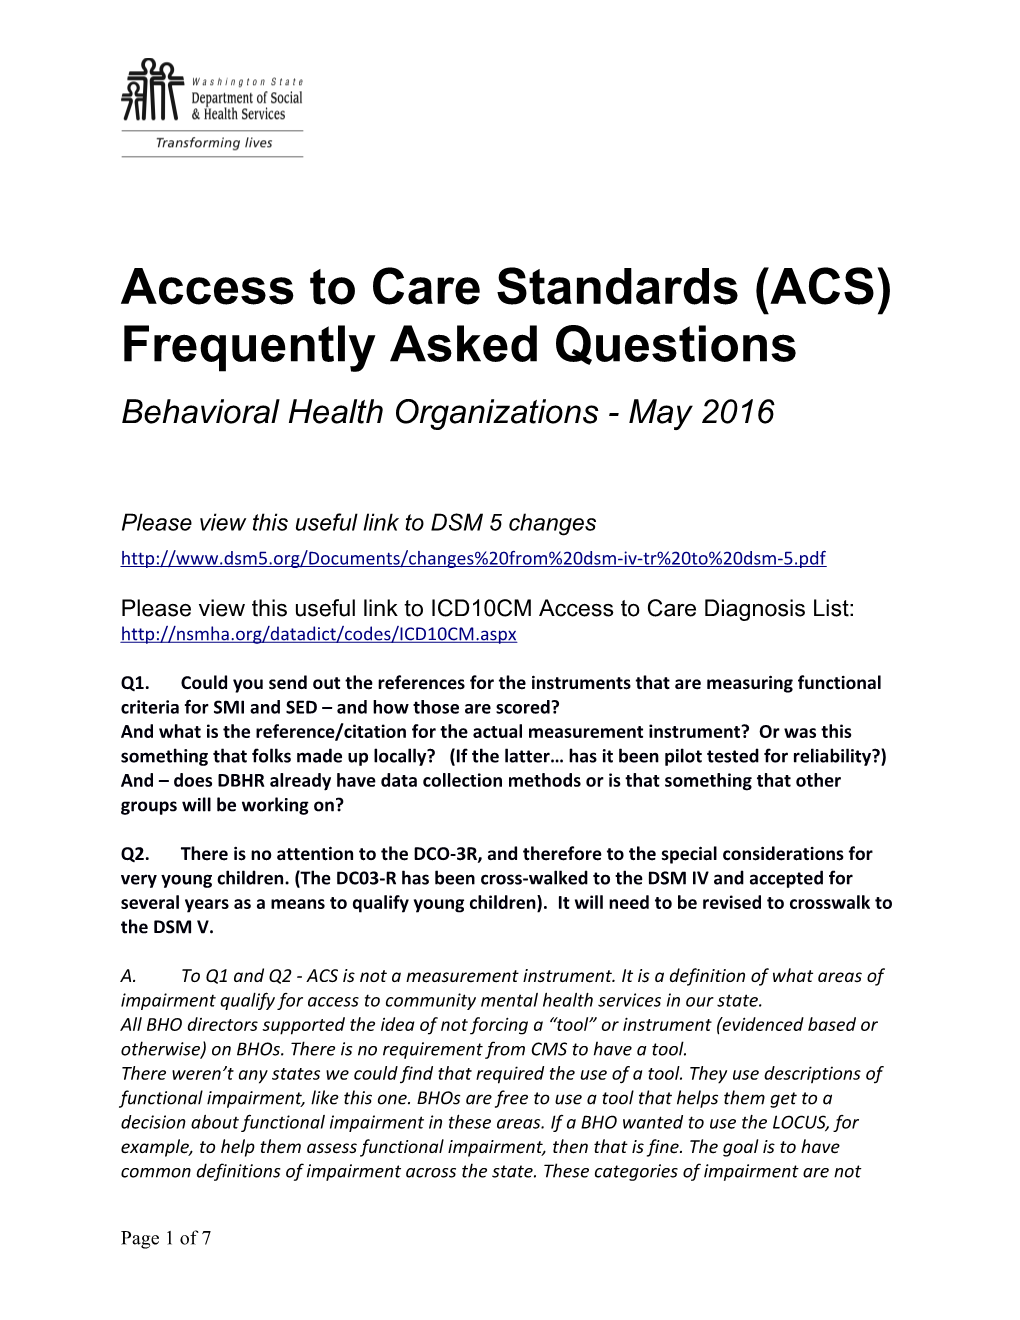 Access to Care Standards (ACS) Frequently Asked Questions